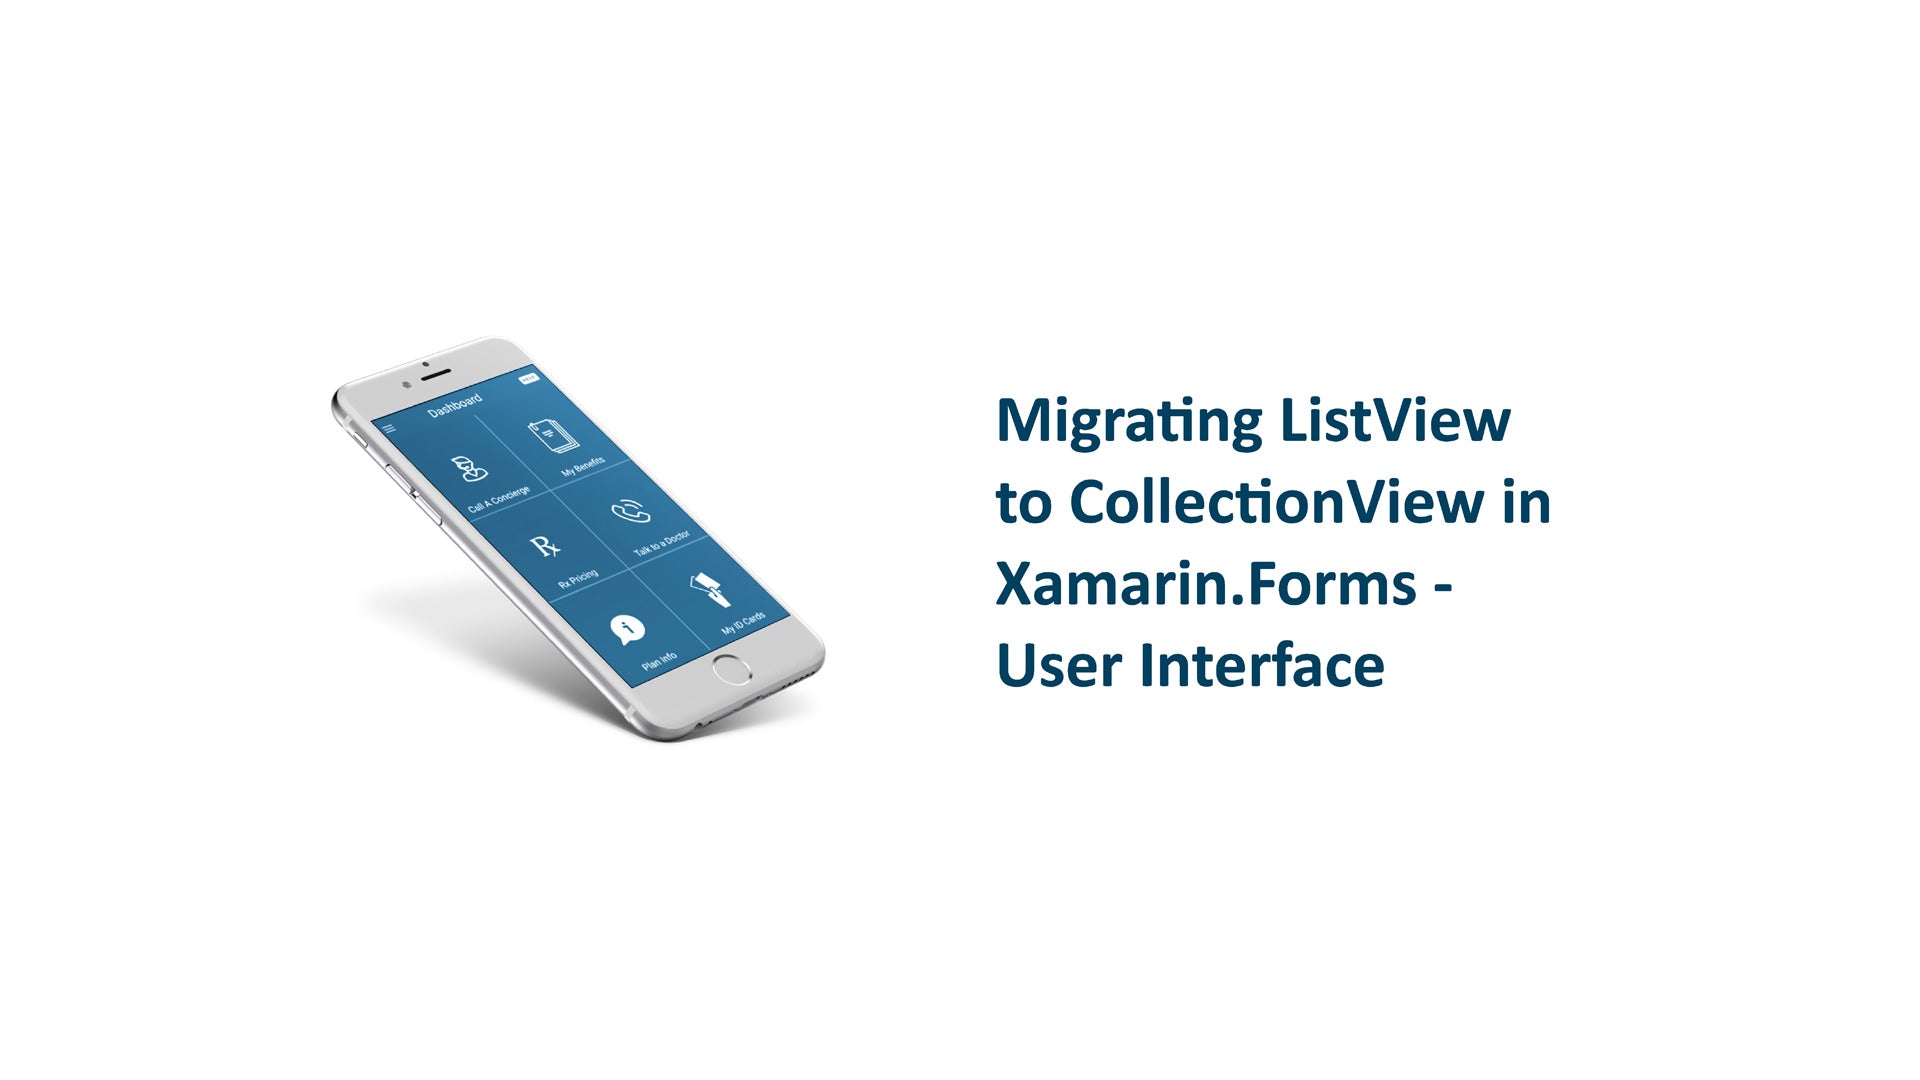 Migrating ListView to CollectionView in Xamarin.Forms - User Interface